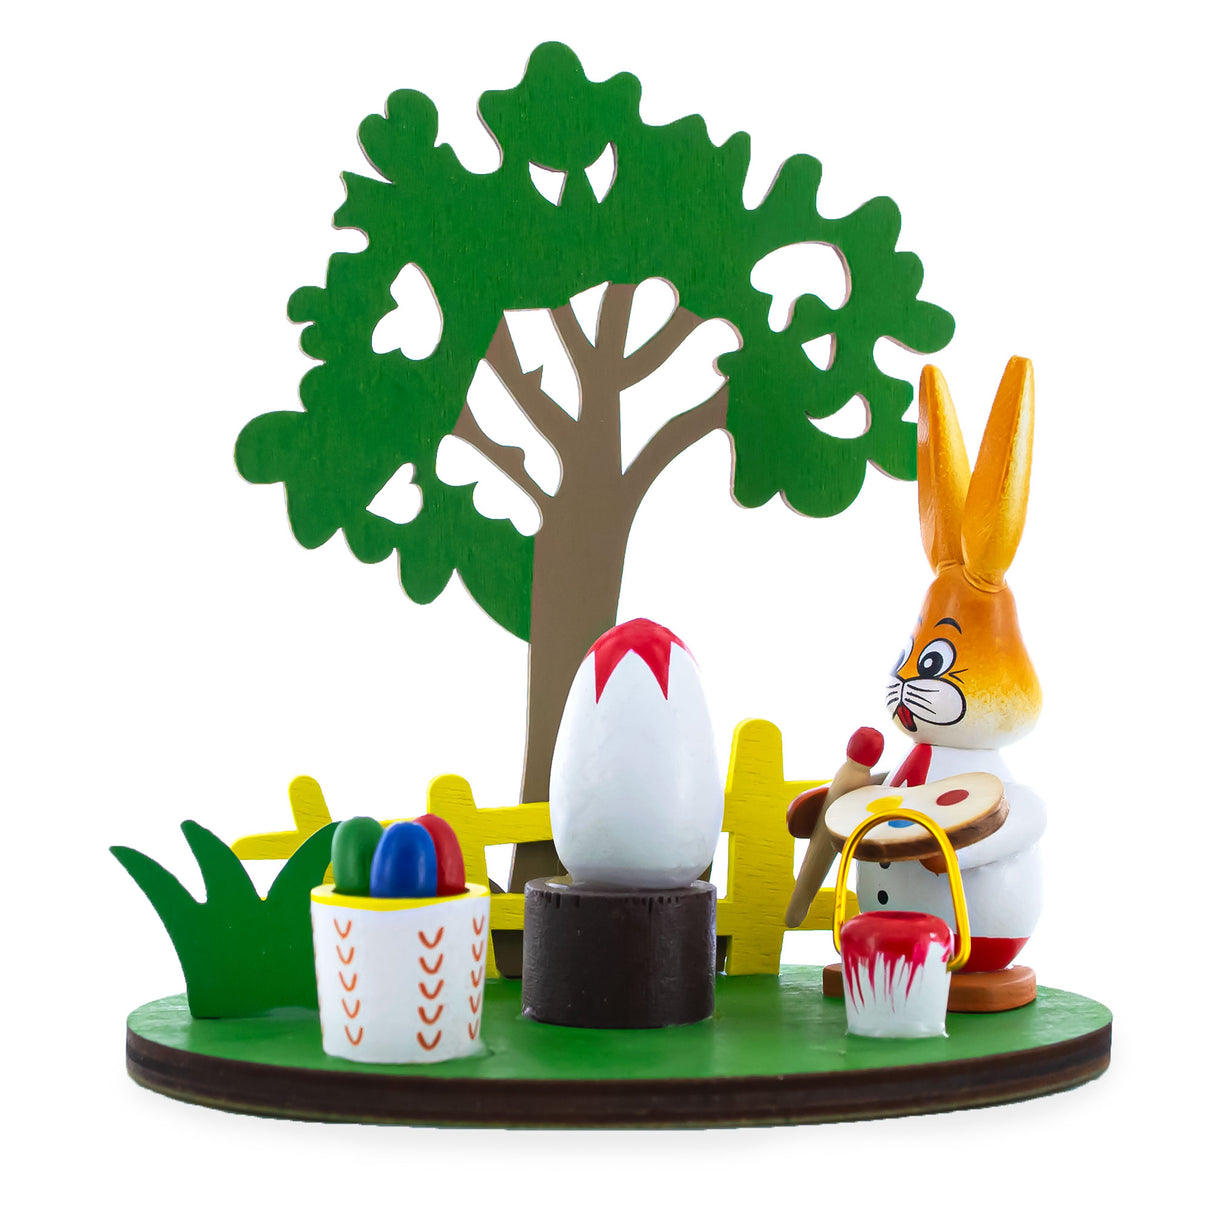 Wood Wooden Bunny Figurine Decorating Easter Eggs in Green color